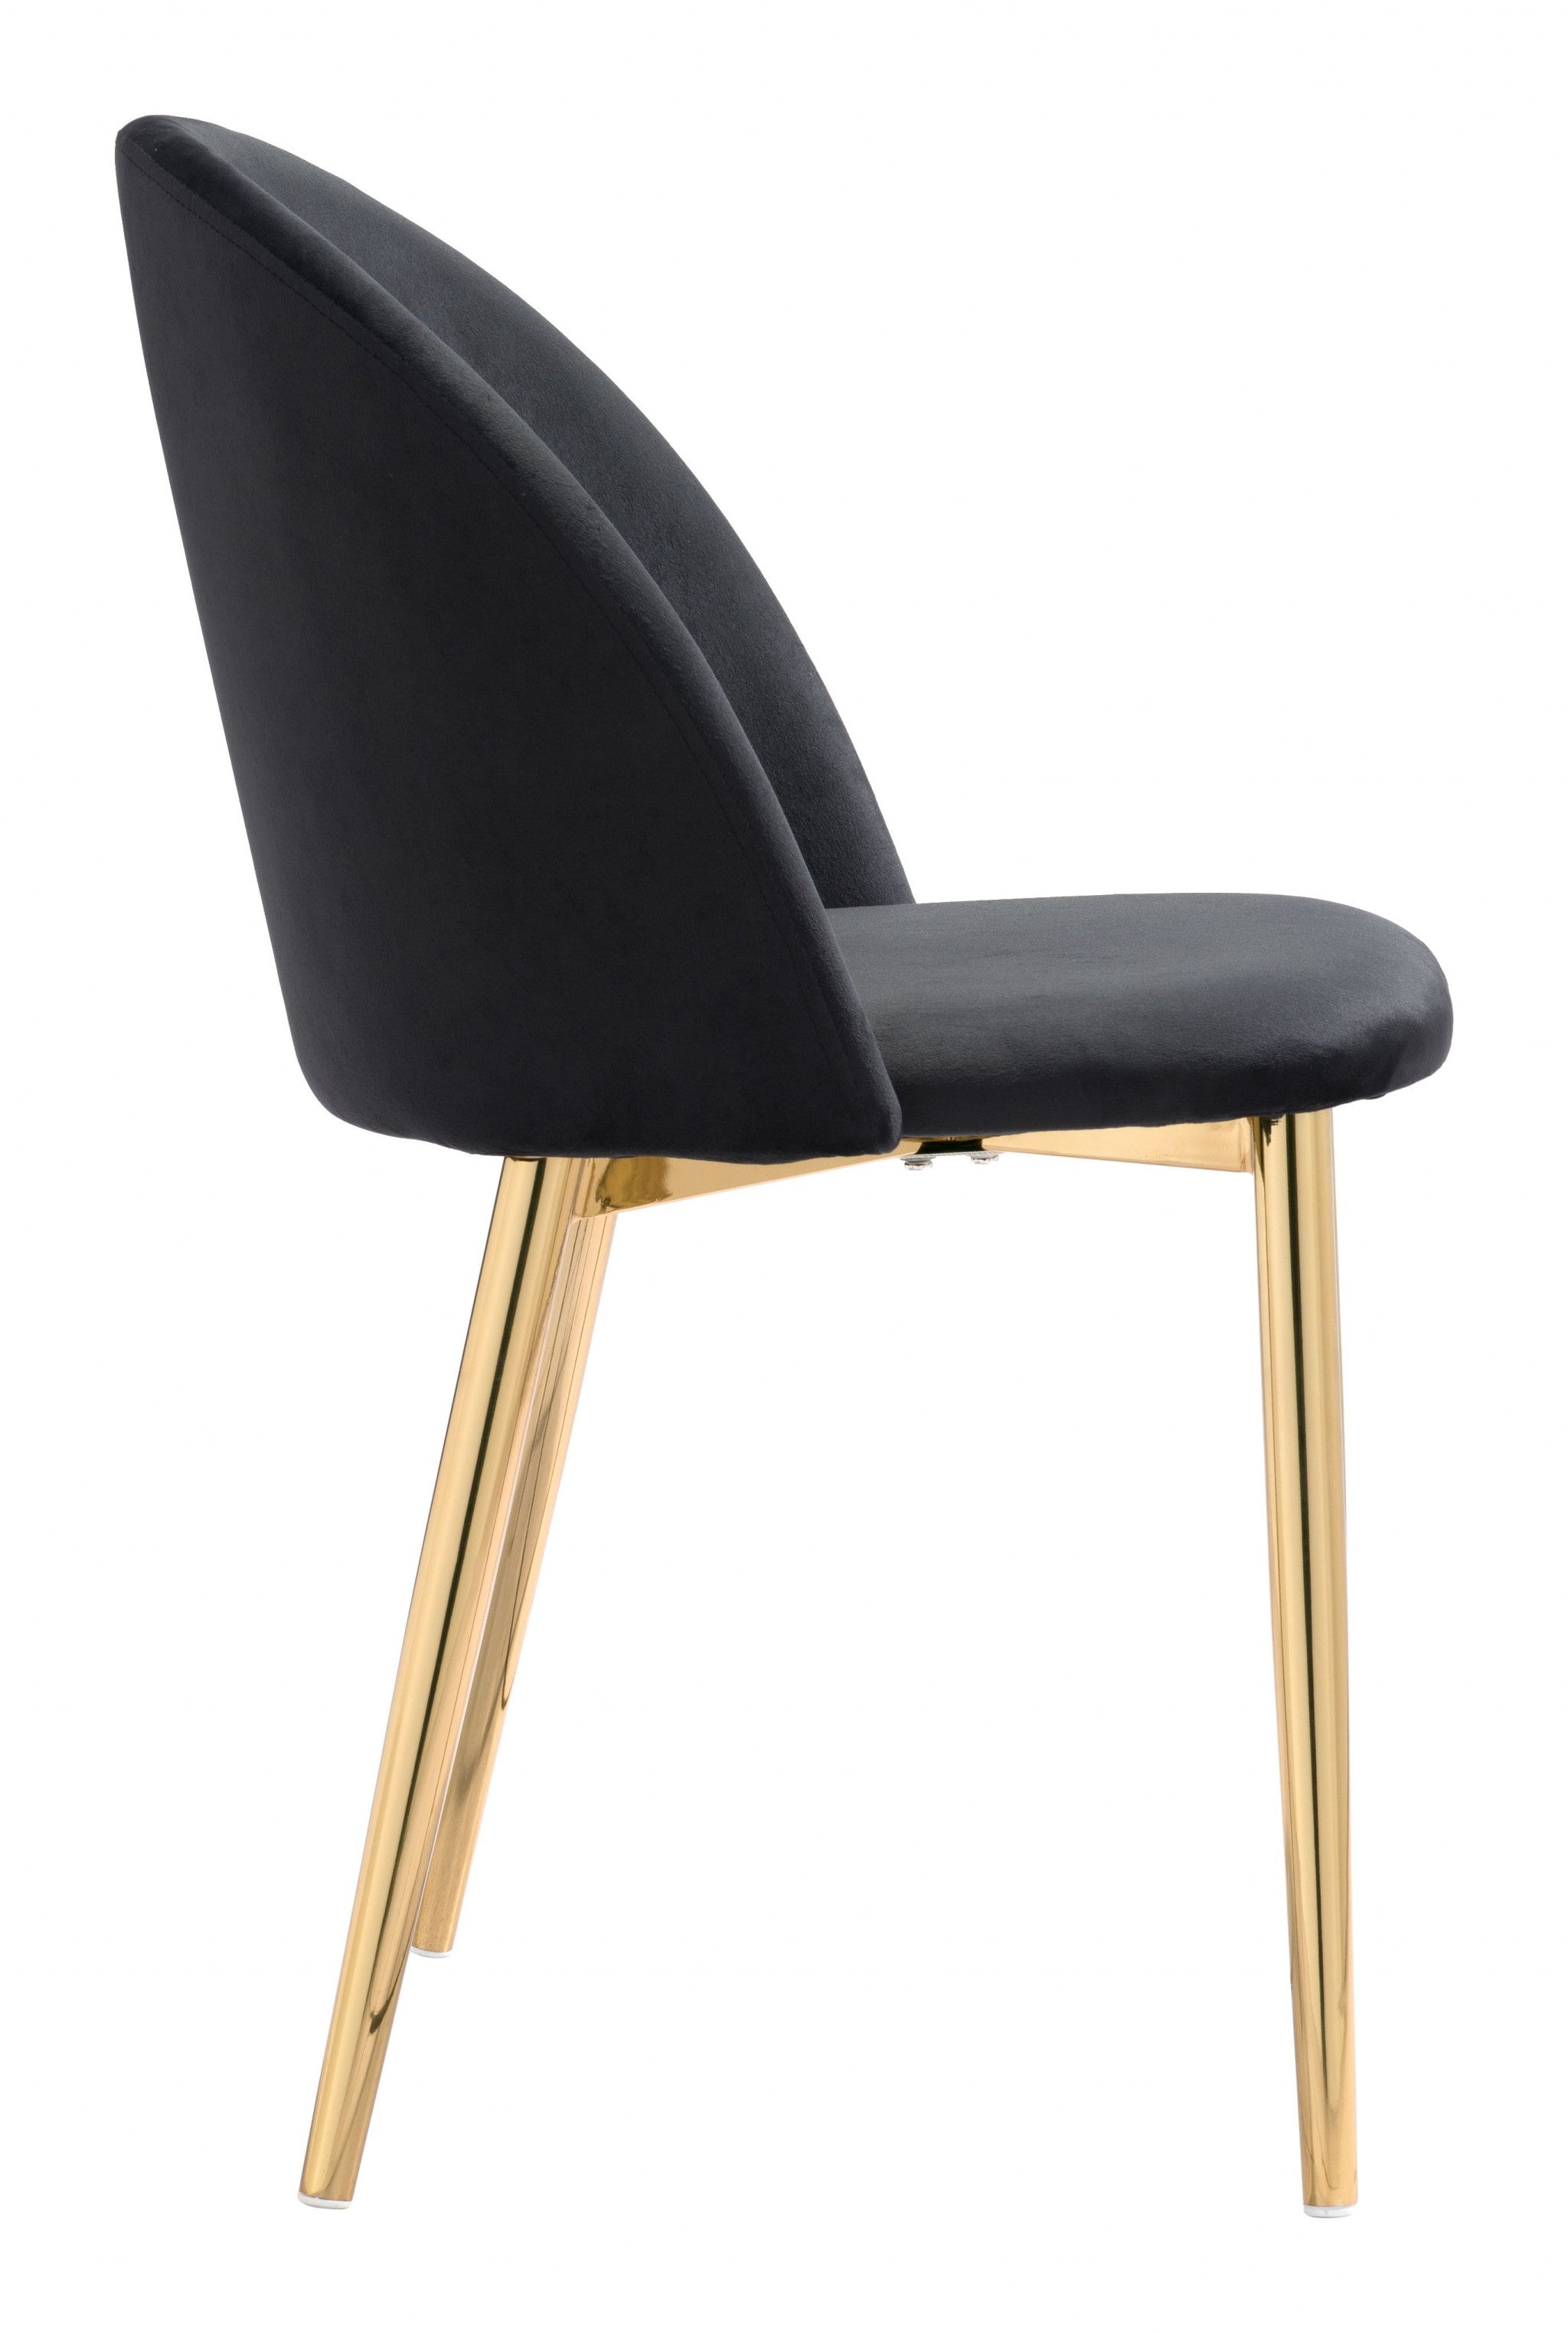 Set of Two Black And Gold Upholstered Polyester Dining Side chairs